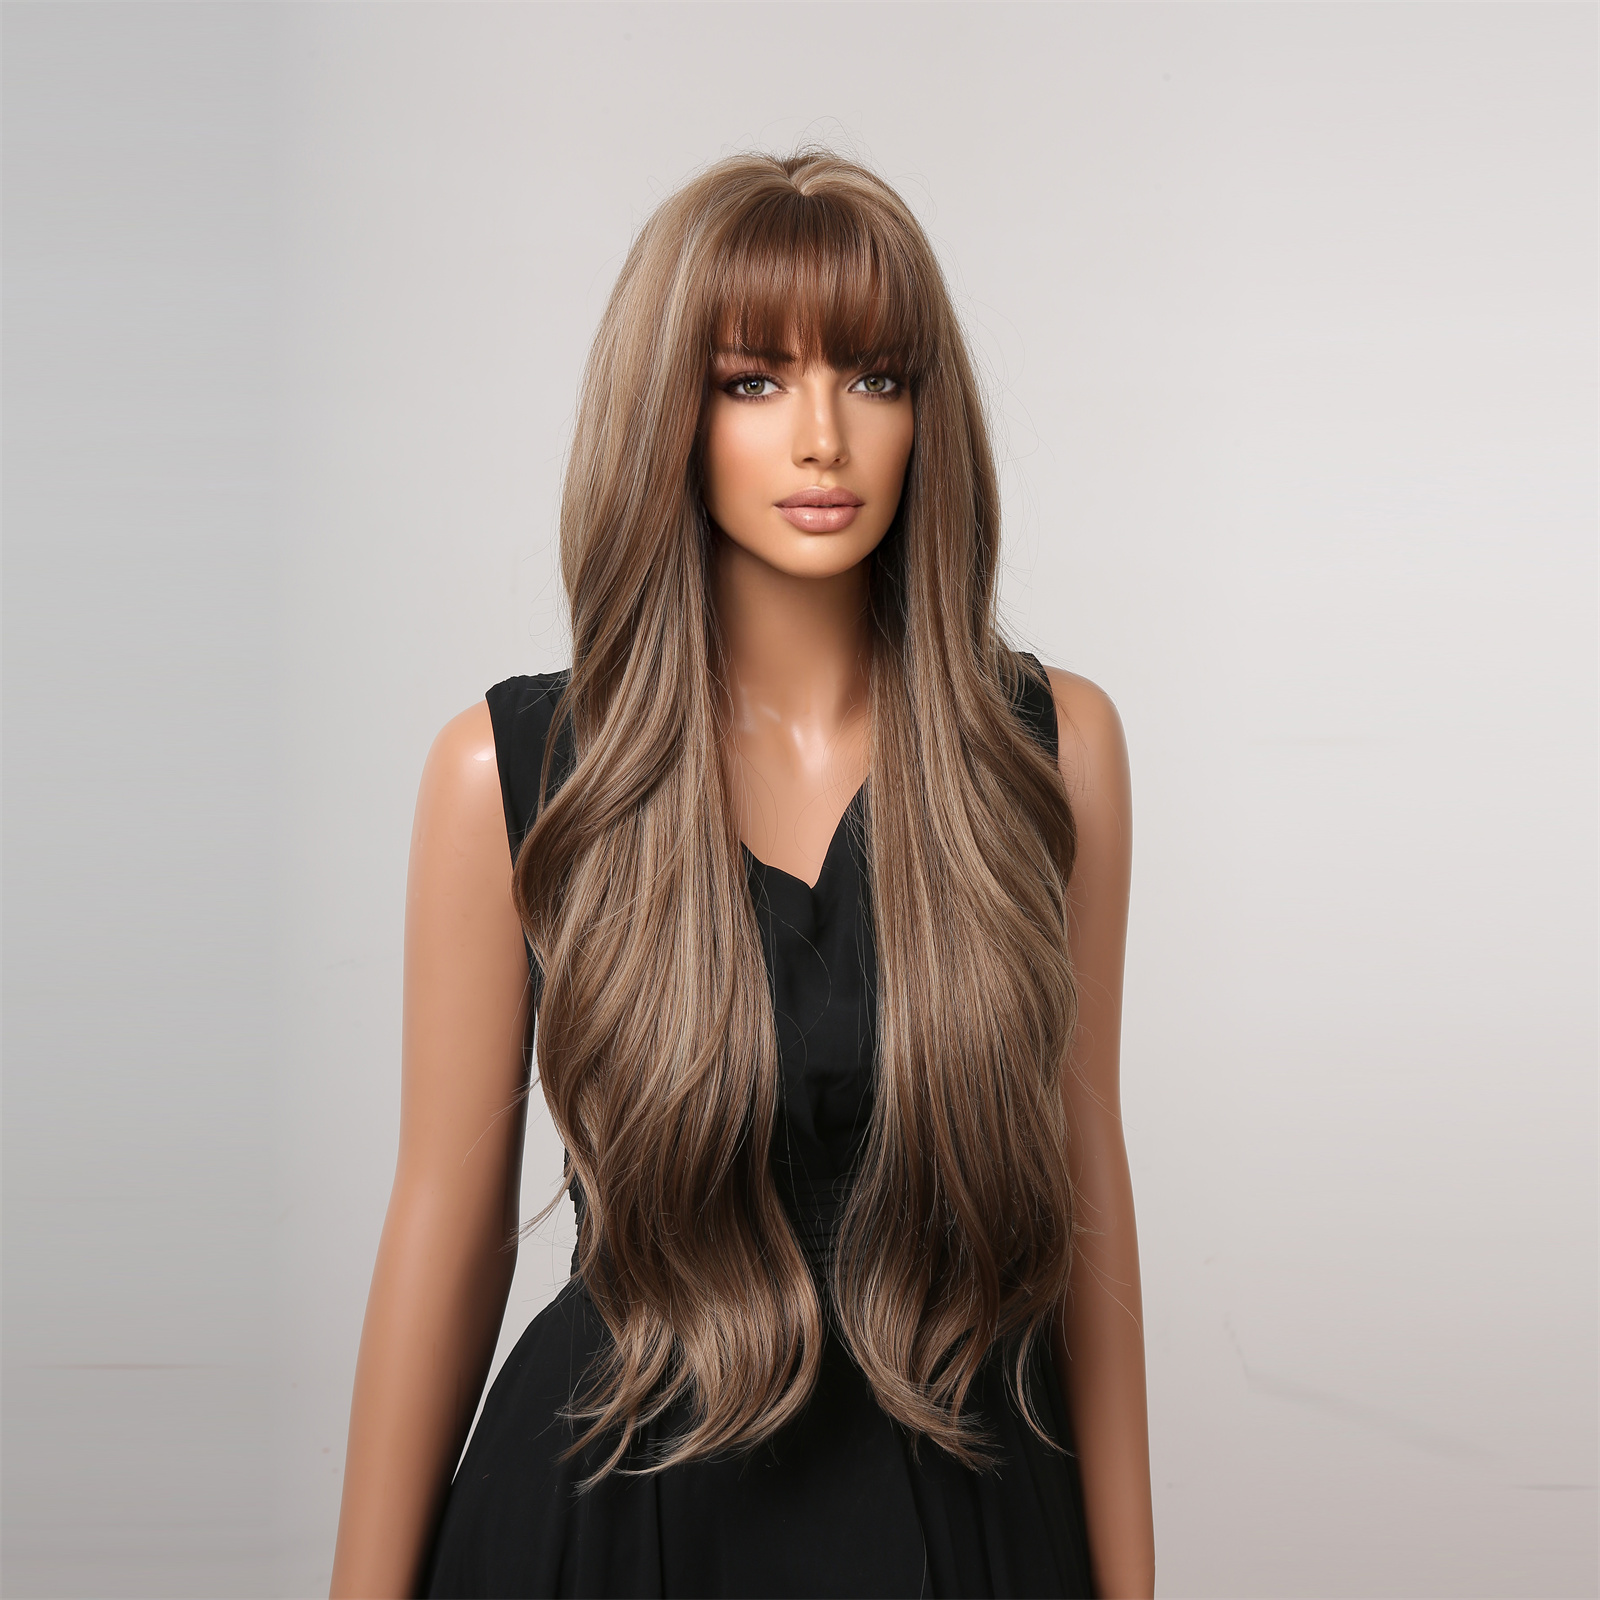 A fashionable dark brown wig with long curly hair and bangs, made from synthetic material for easy styling and a trendy appearance